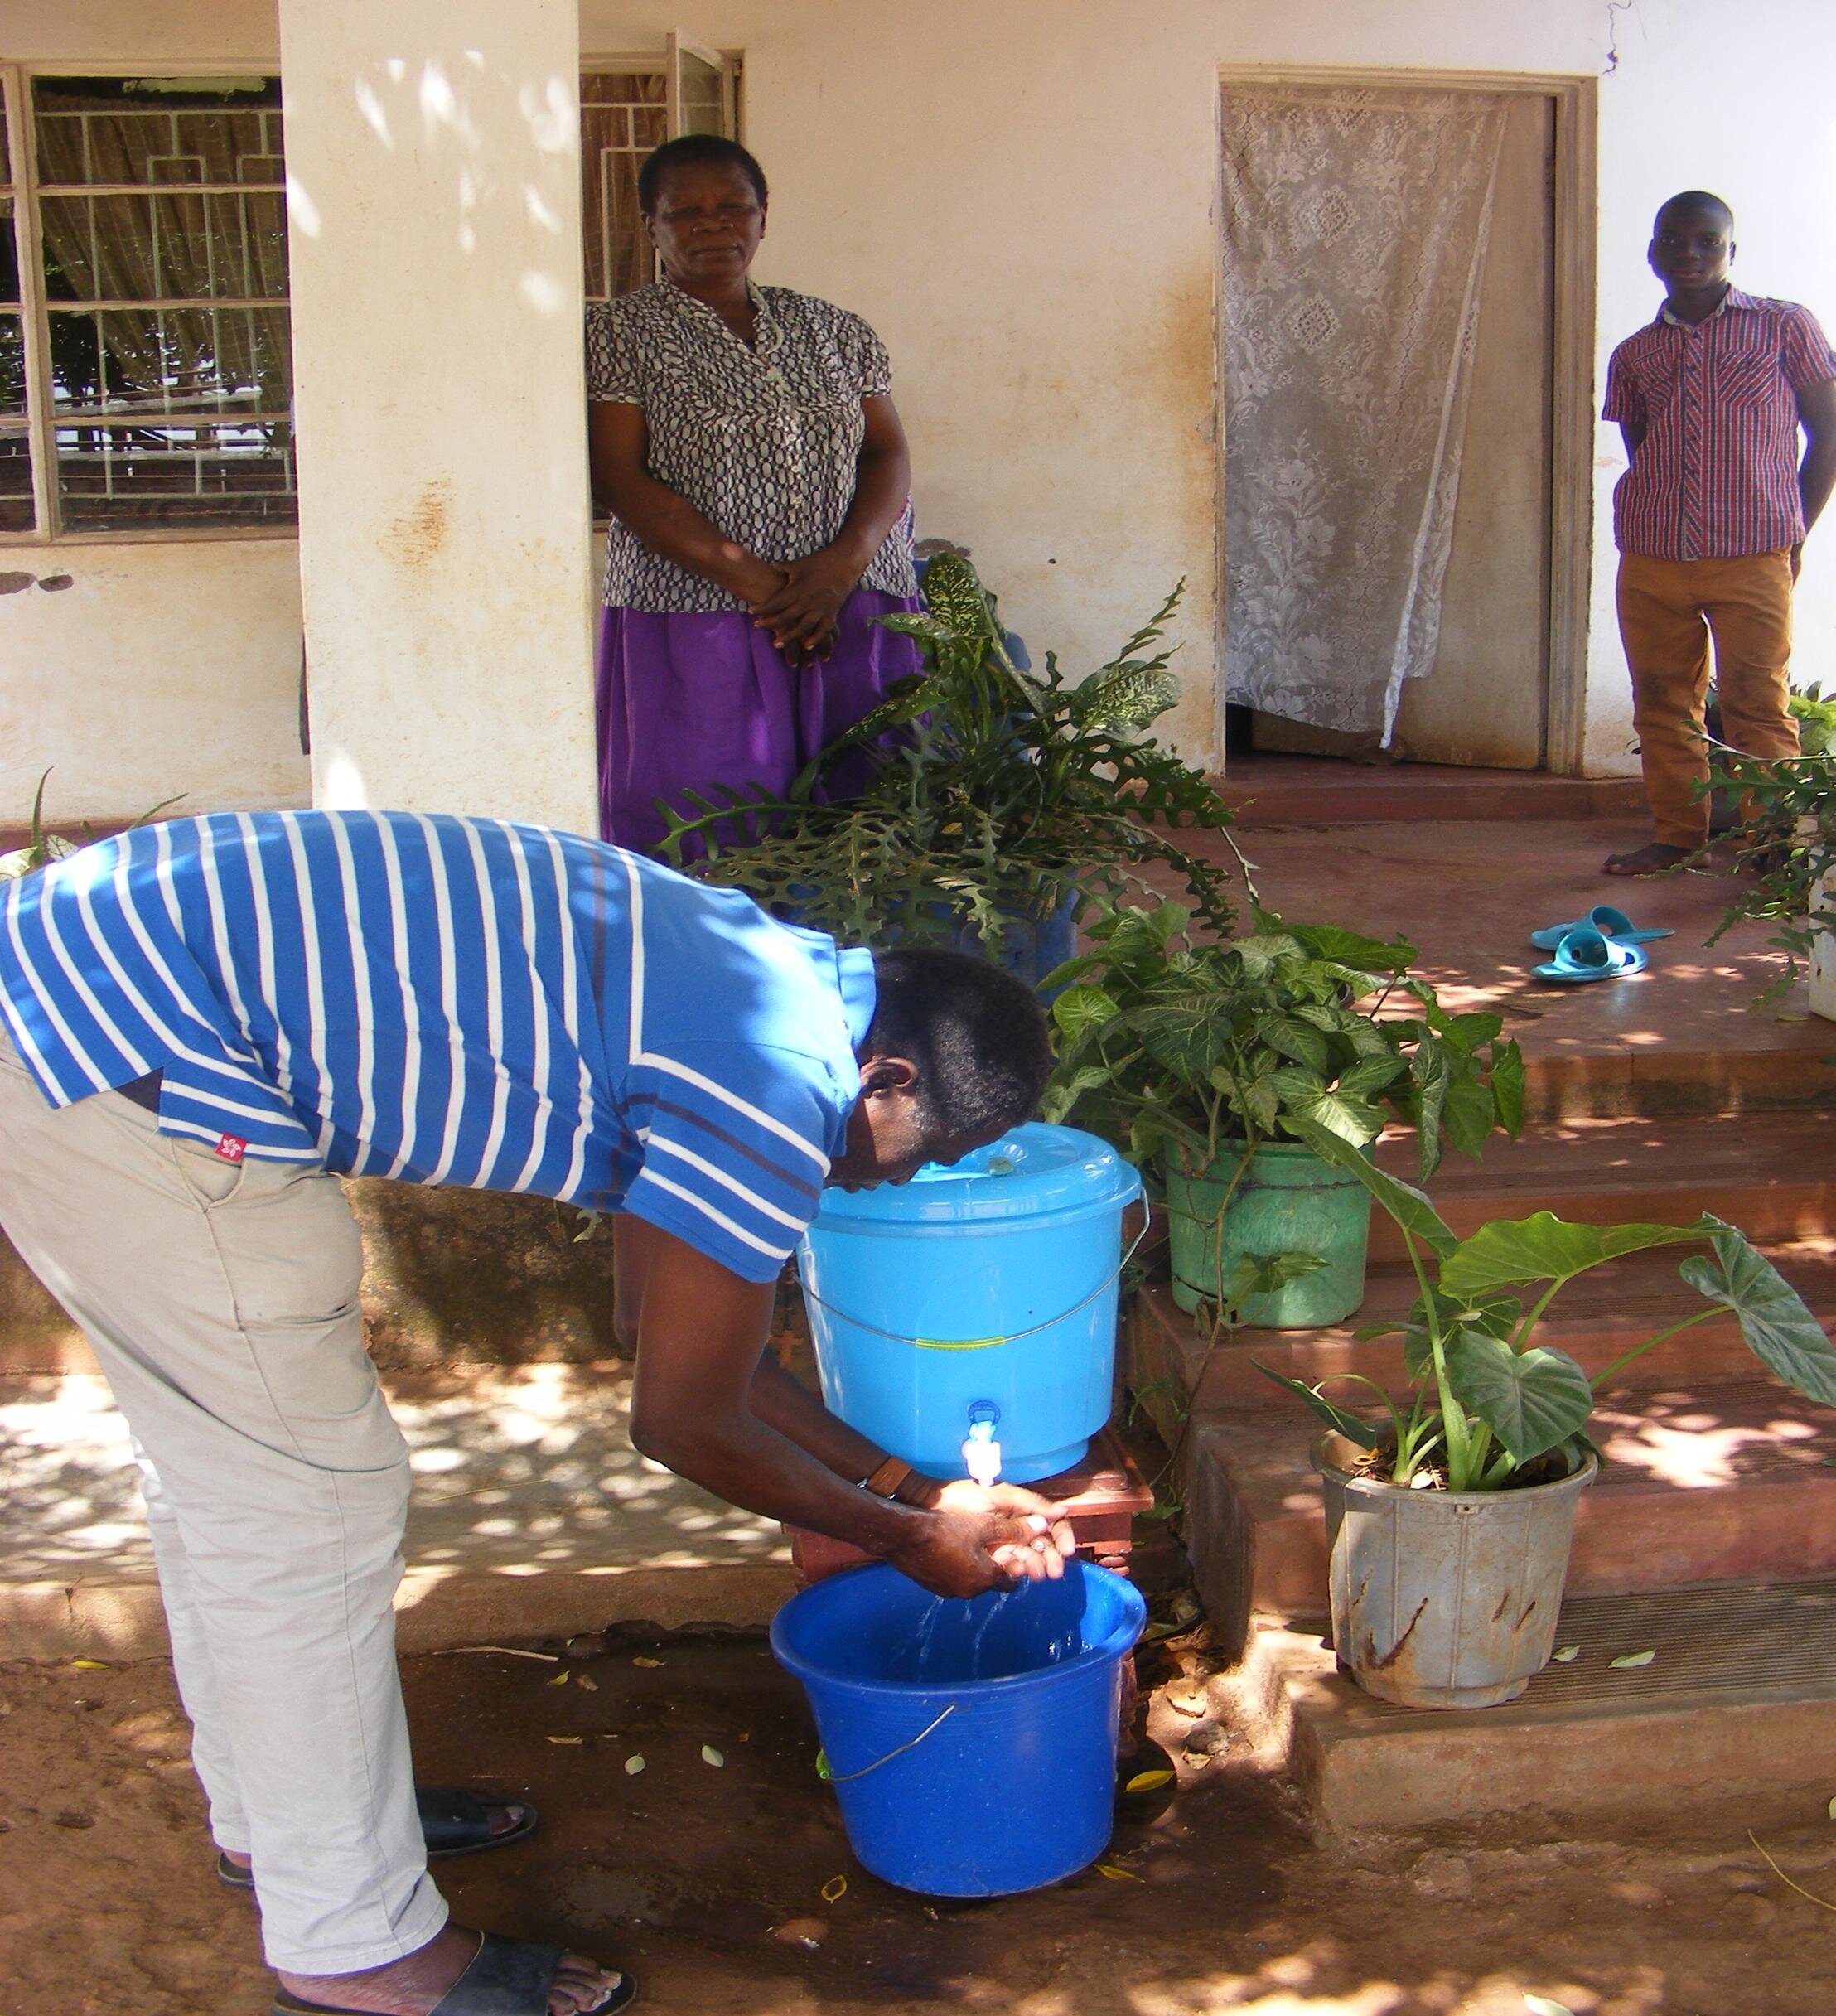 CHICOSUDO EXECUTIVE DIRECTOR DEMONSTRATING HAND WASHING WITH SOAP.jpg